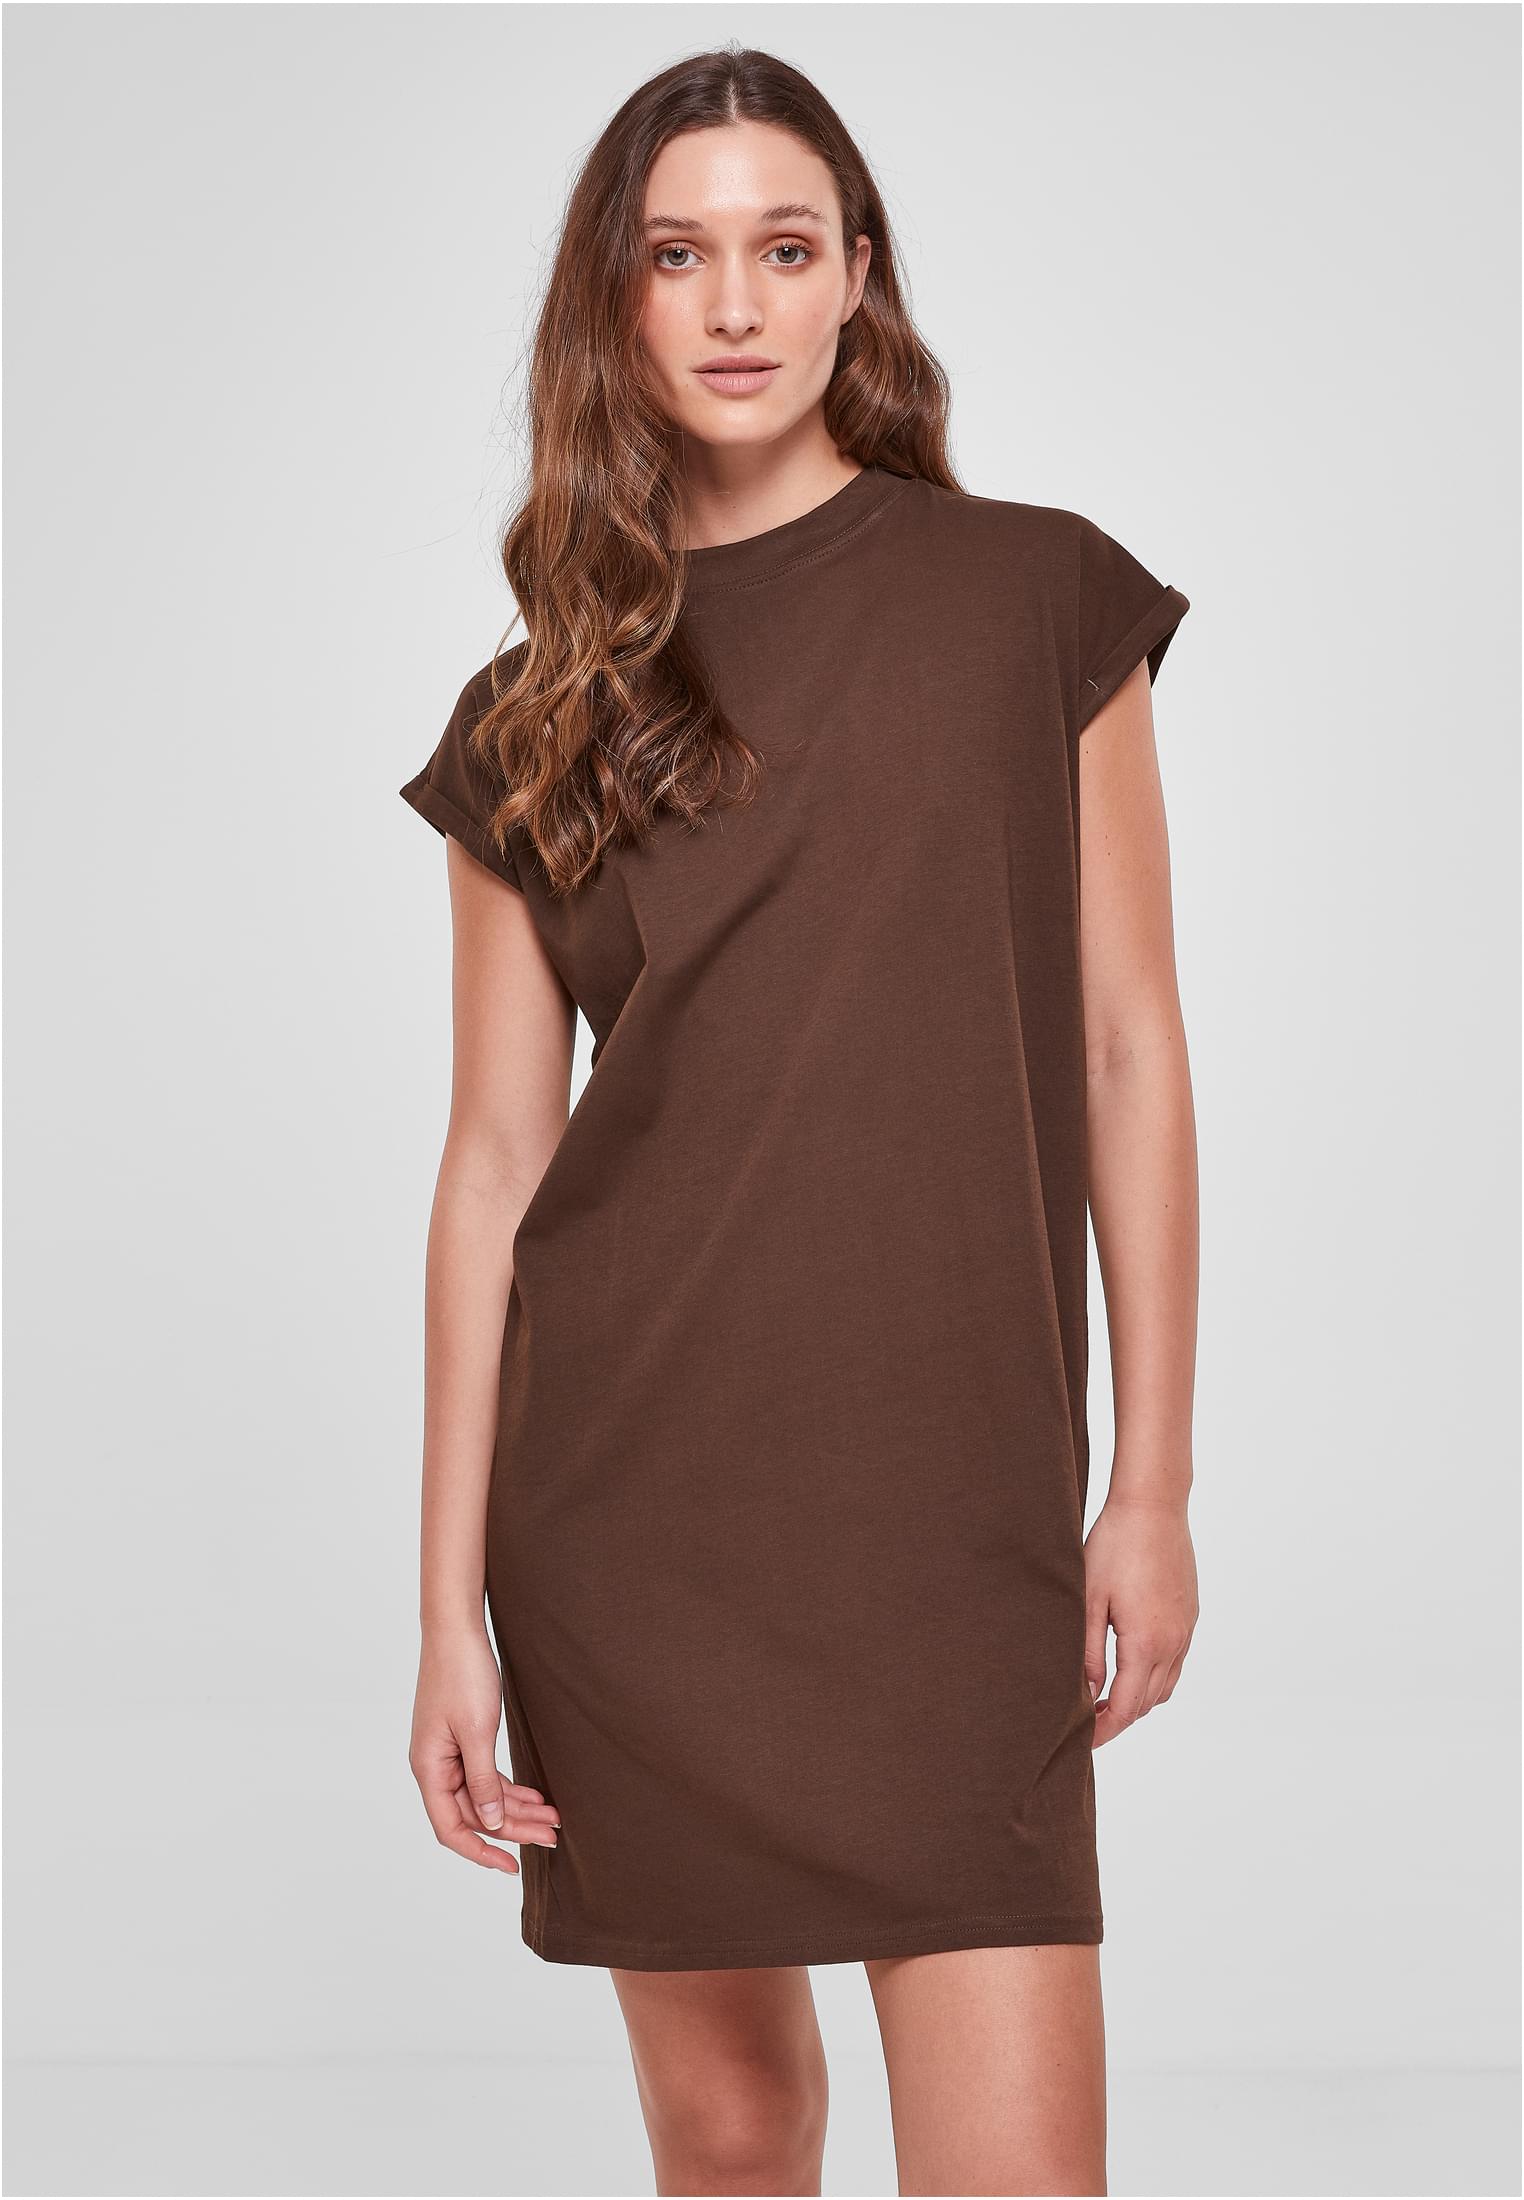 Women's tortoise dress with extended shoulder brown